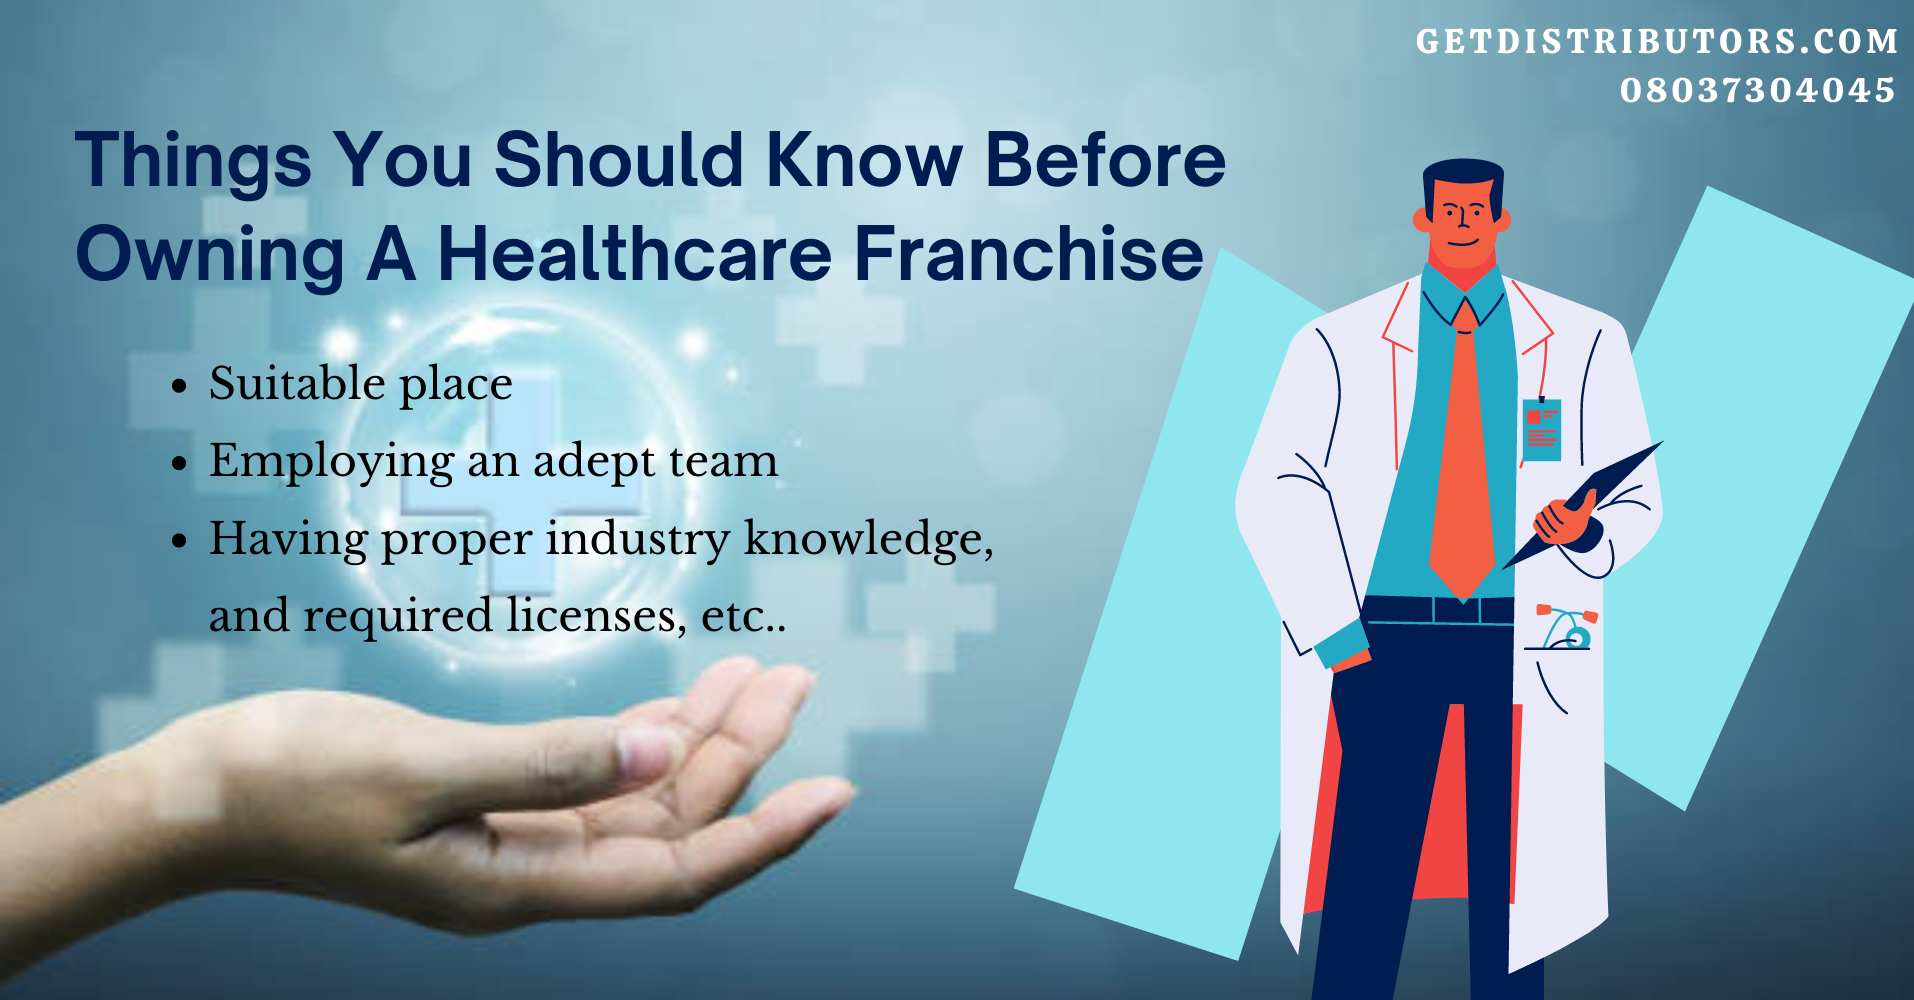 Things You Should Know Before Owning A Healthcare Franchise